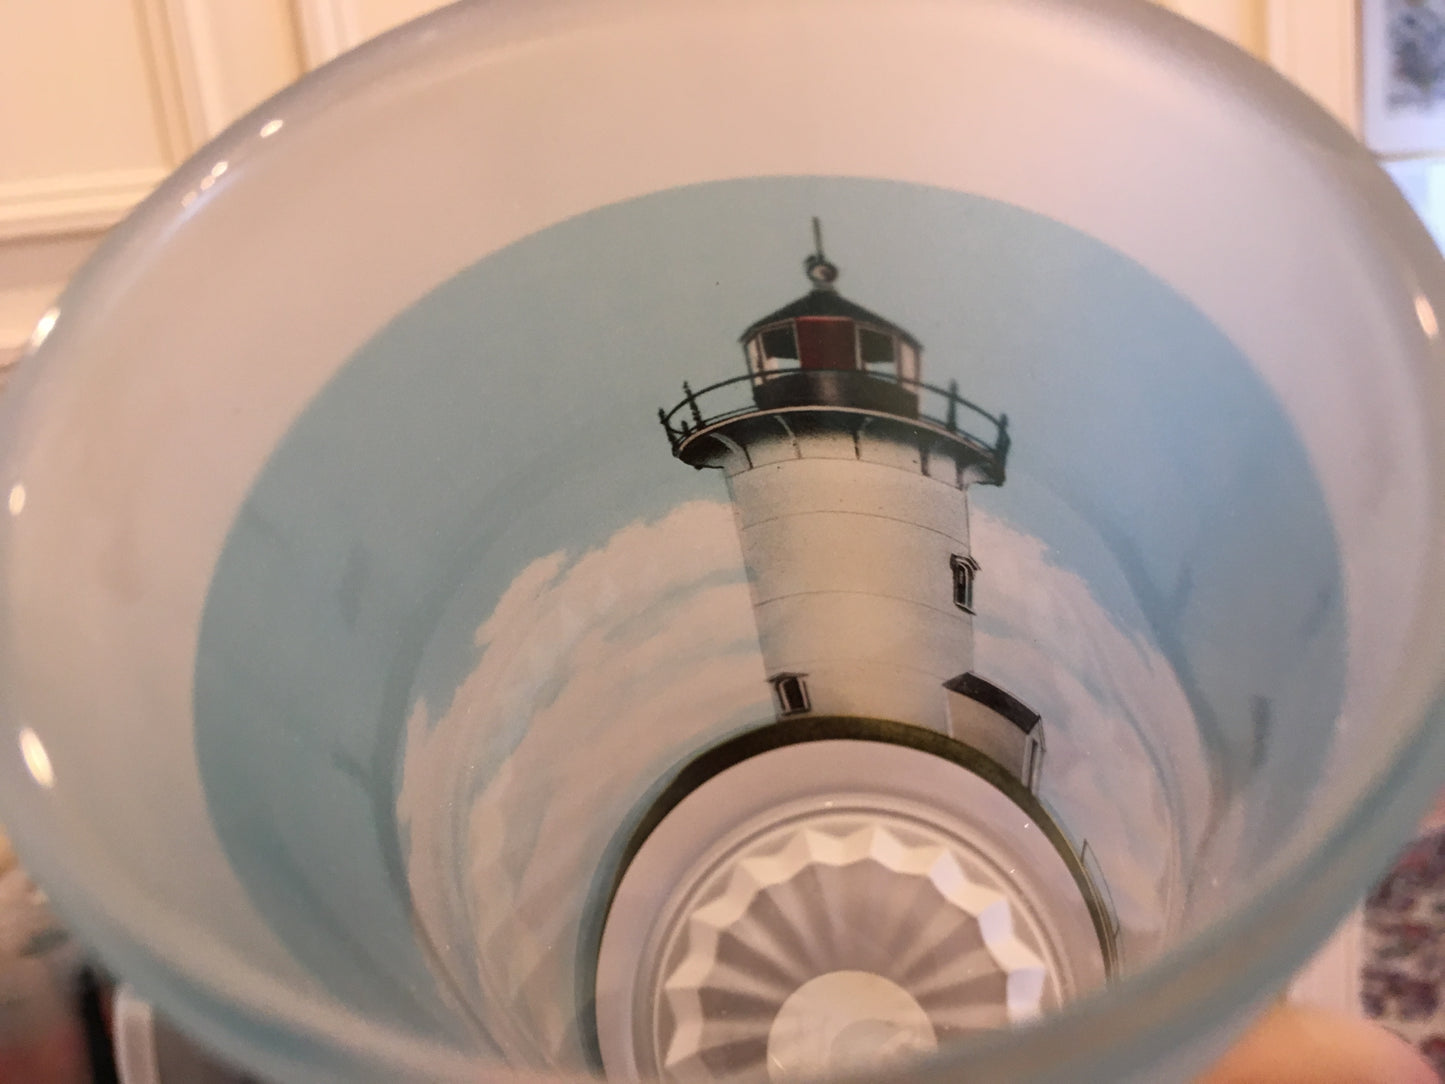 Colorful Frosted Glass Mug of Nobska Light in Falmouth, MA on Cape Cod - That Fabled Shore Home Decor